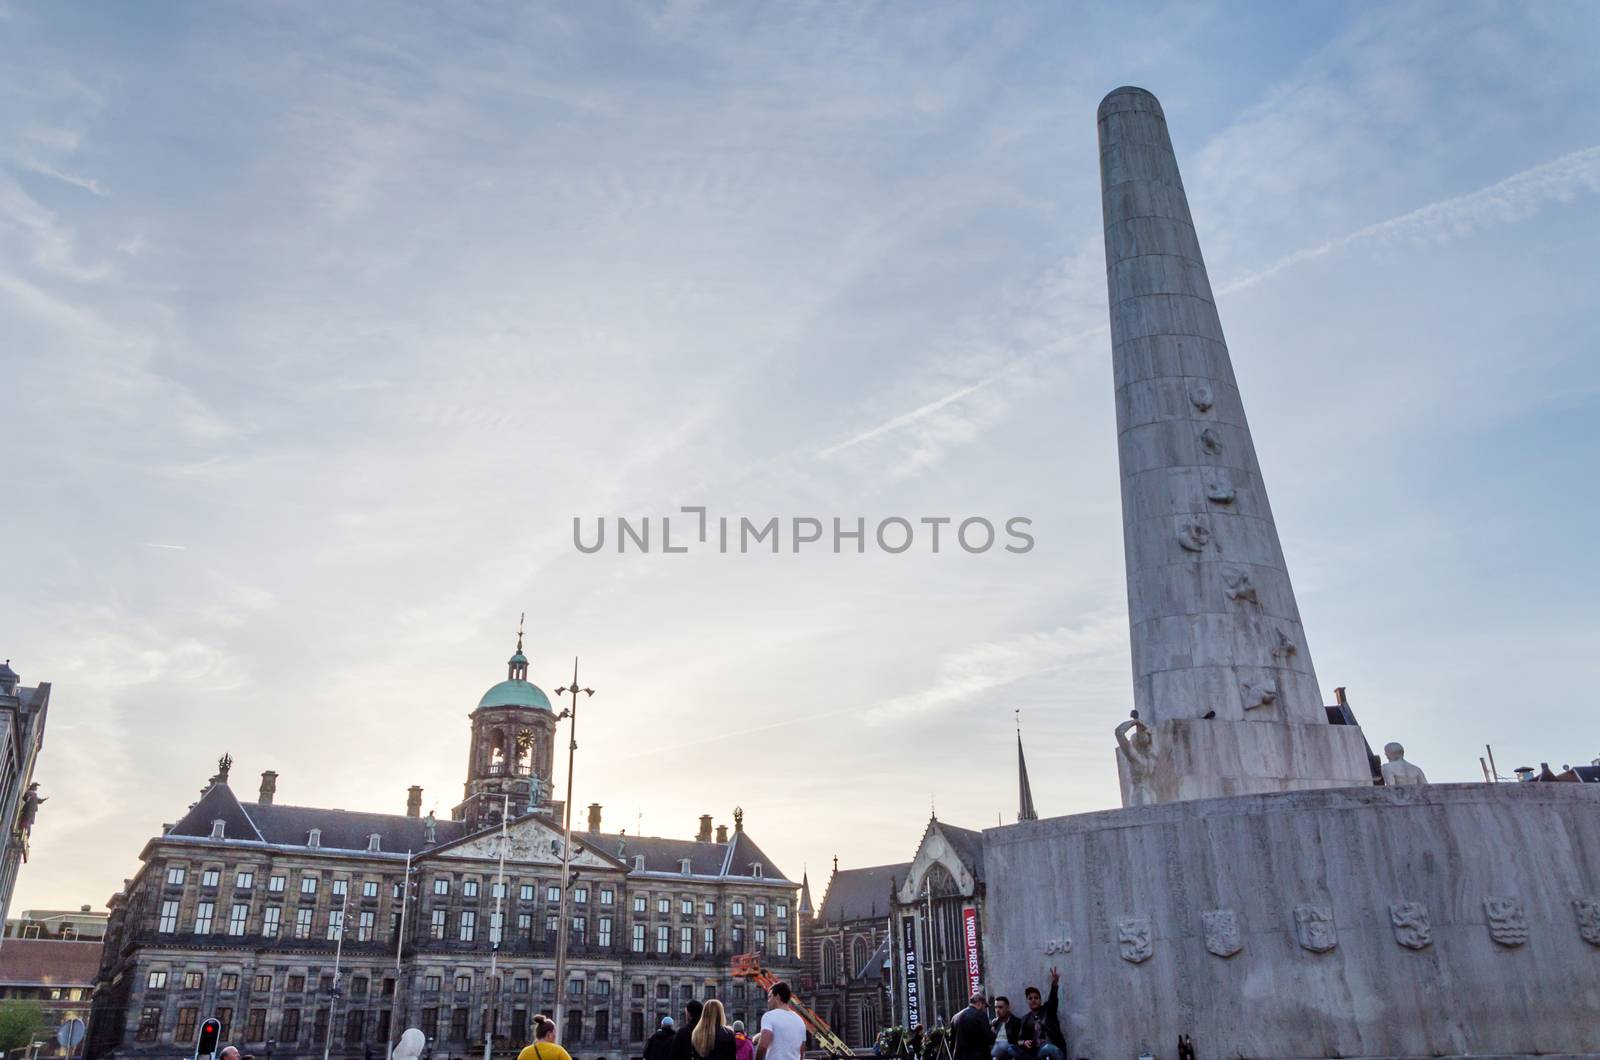 Amsterdam, Netherlands - May 8, 2015: People visit The Dam monument on May 8, 2015. The stone pillar is a National Monument, designed by J.J.P. Oud and erected in 1956 to memorialize the victims of the World War II. 